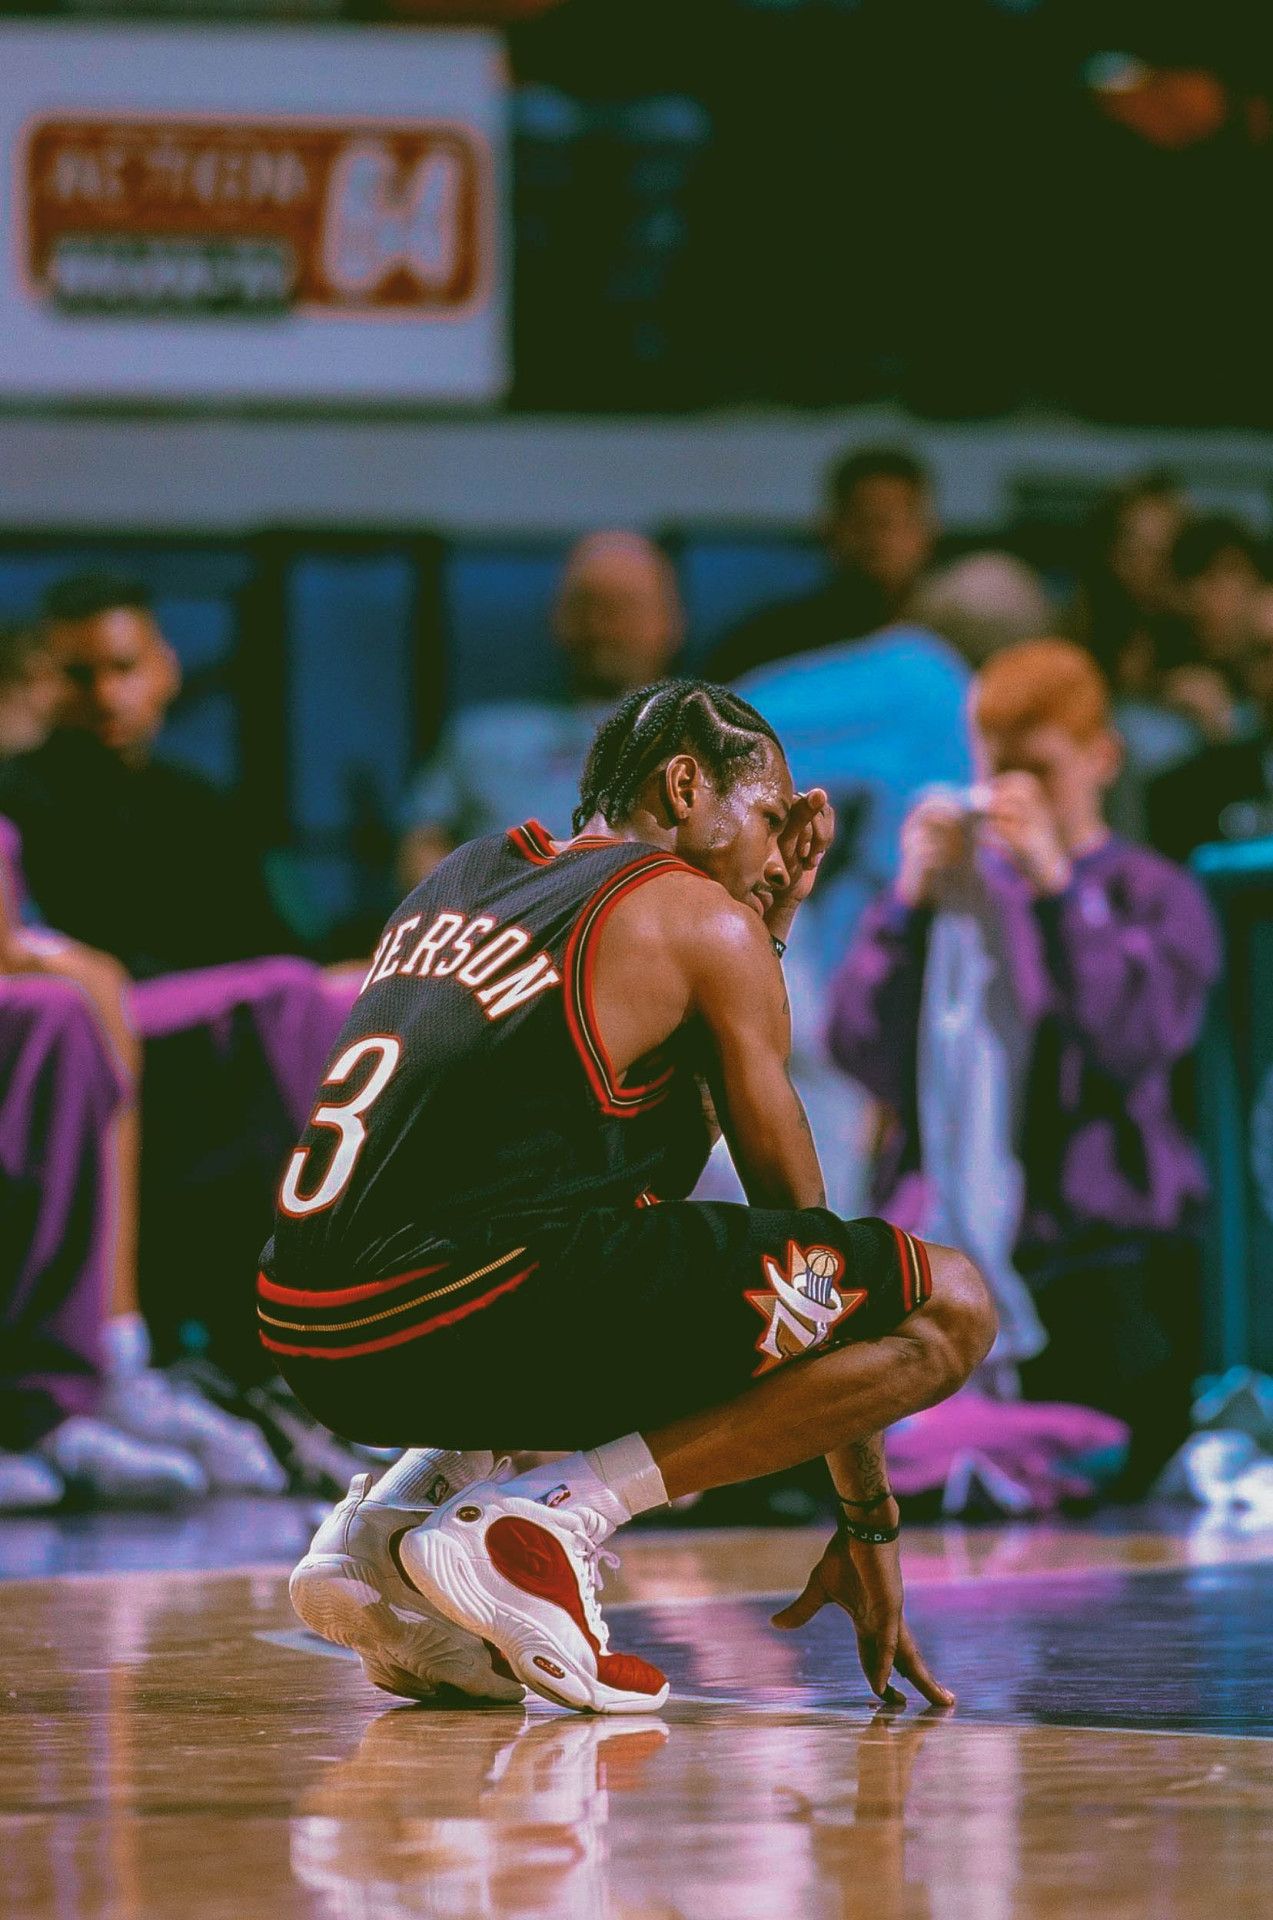 Strapped Archives. Nba fashion, Basketball photography, Nba picture